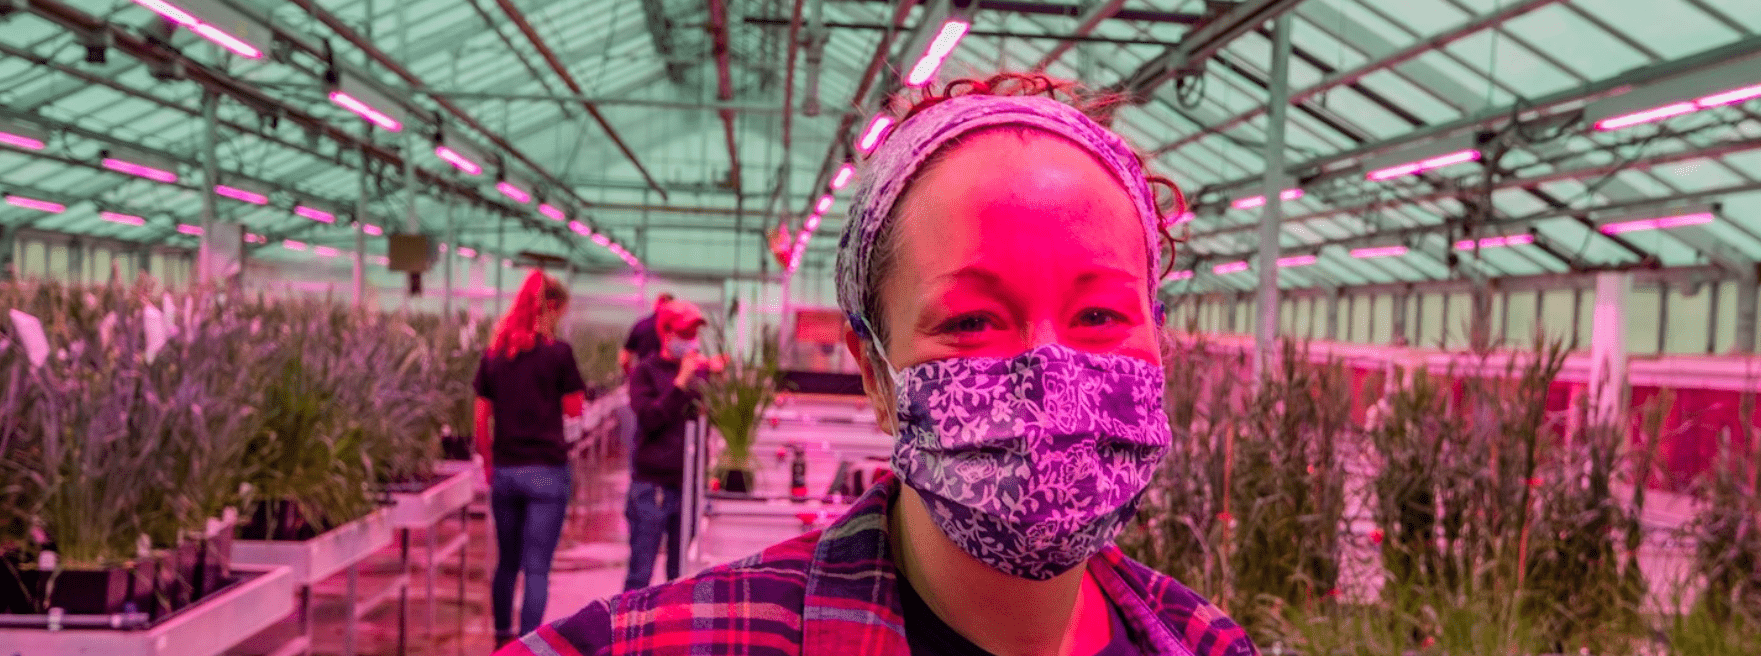 Women in a greenhouse under pink lights